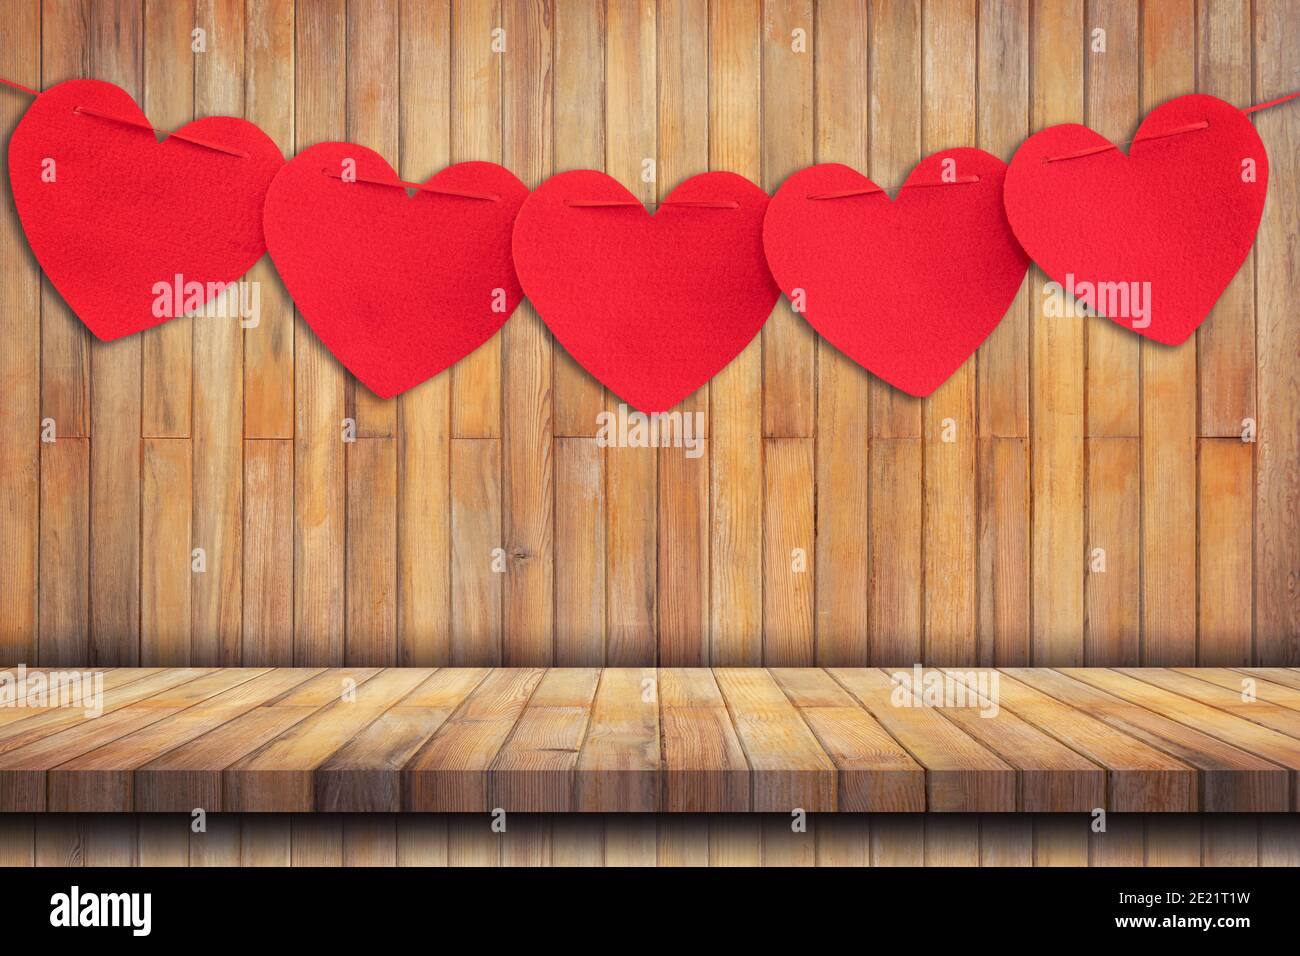 Red heart hanging on Wood table Background and Texture vertical. Stock Photo